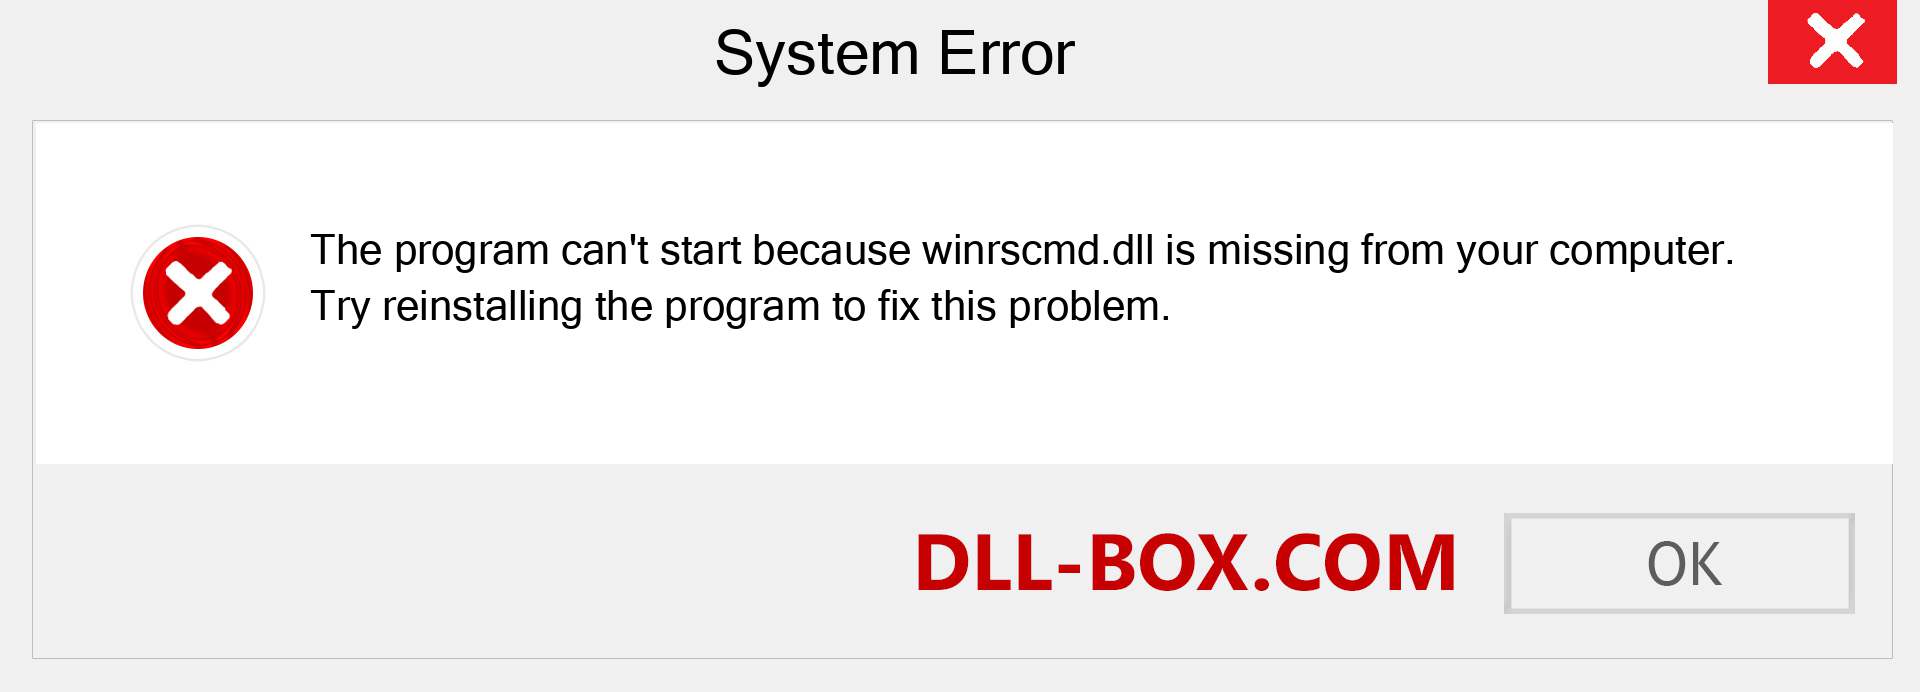  winrscmd.dll file is missing?. Download for Windows 7, 8, 10 - Fix  winrscmd dll Missing Error on Windows, photos, images